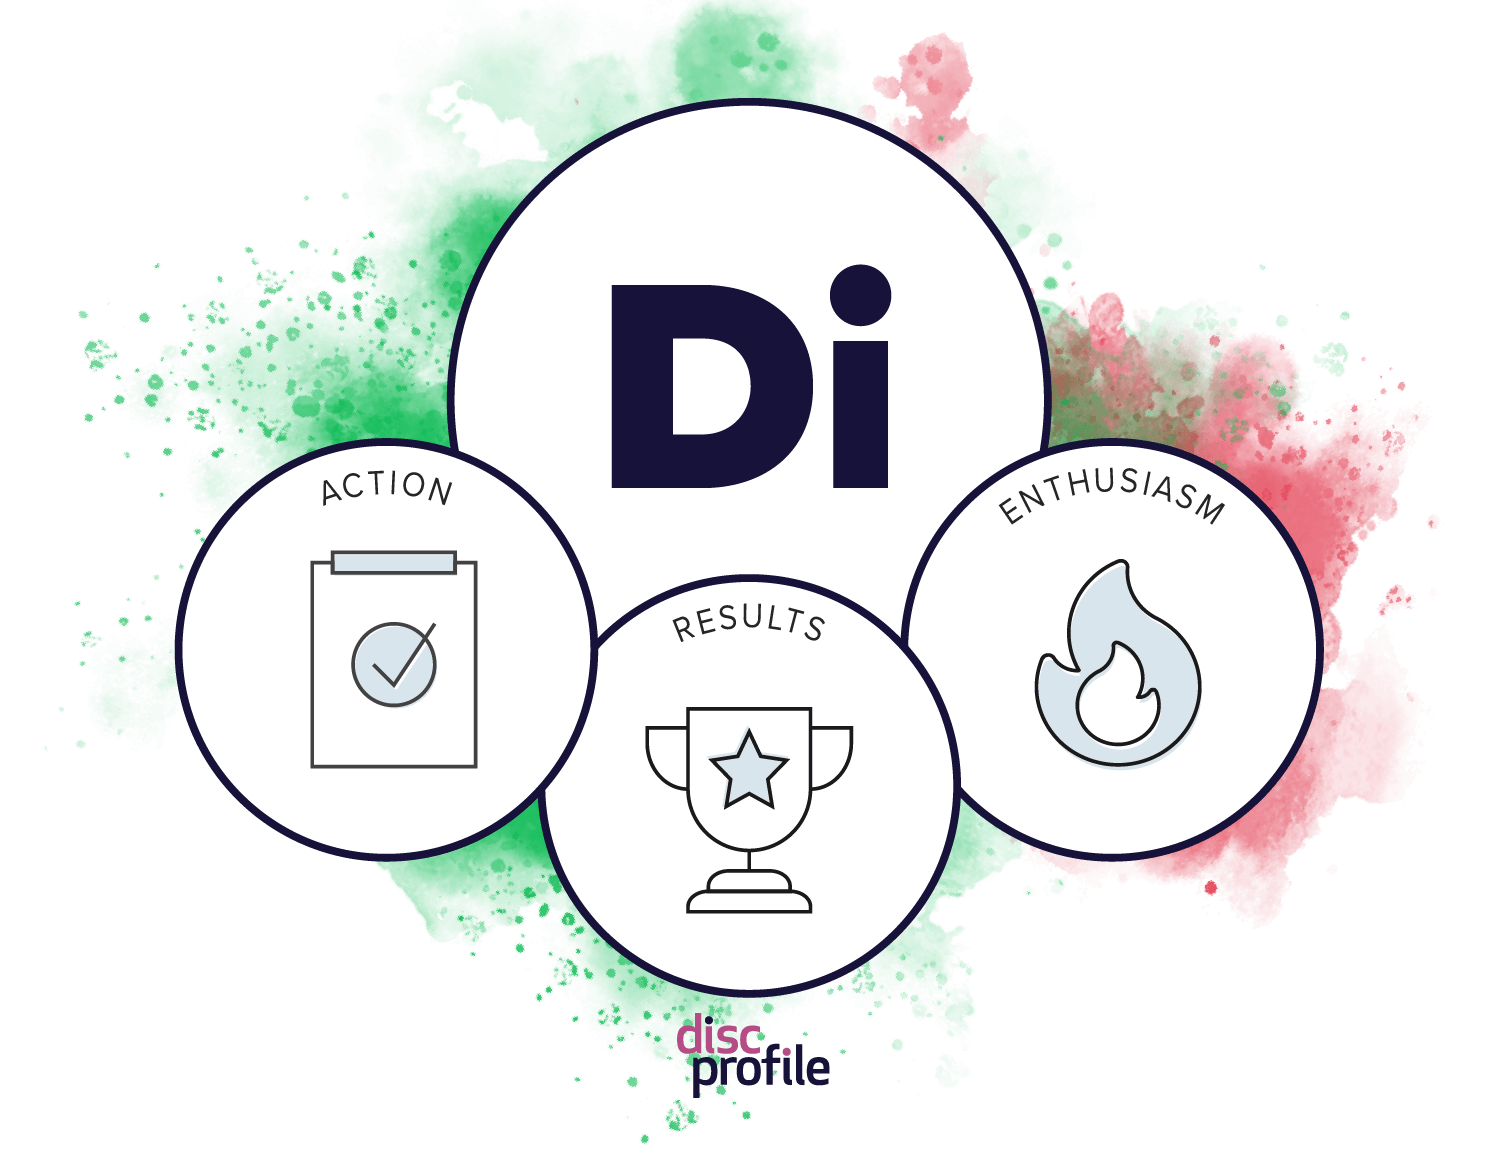 Di style graphic with the priorities of action, results, and enthusiasm